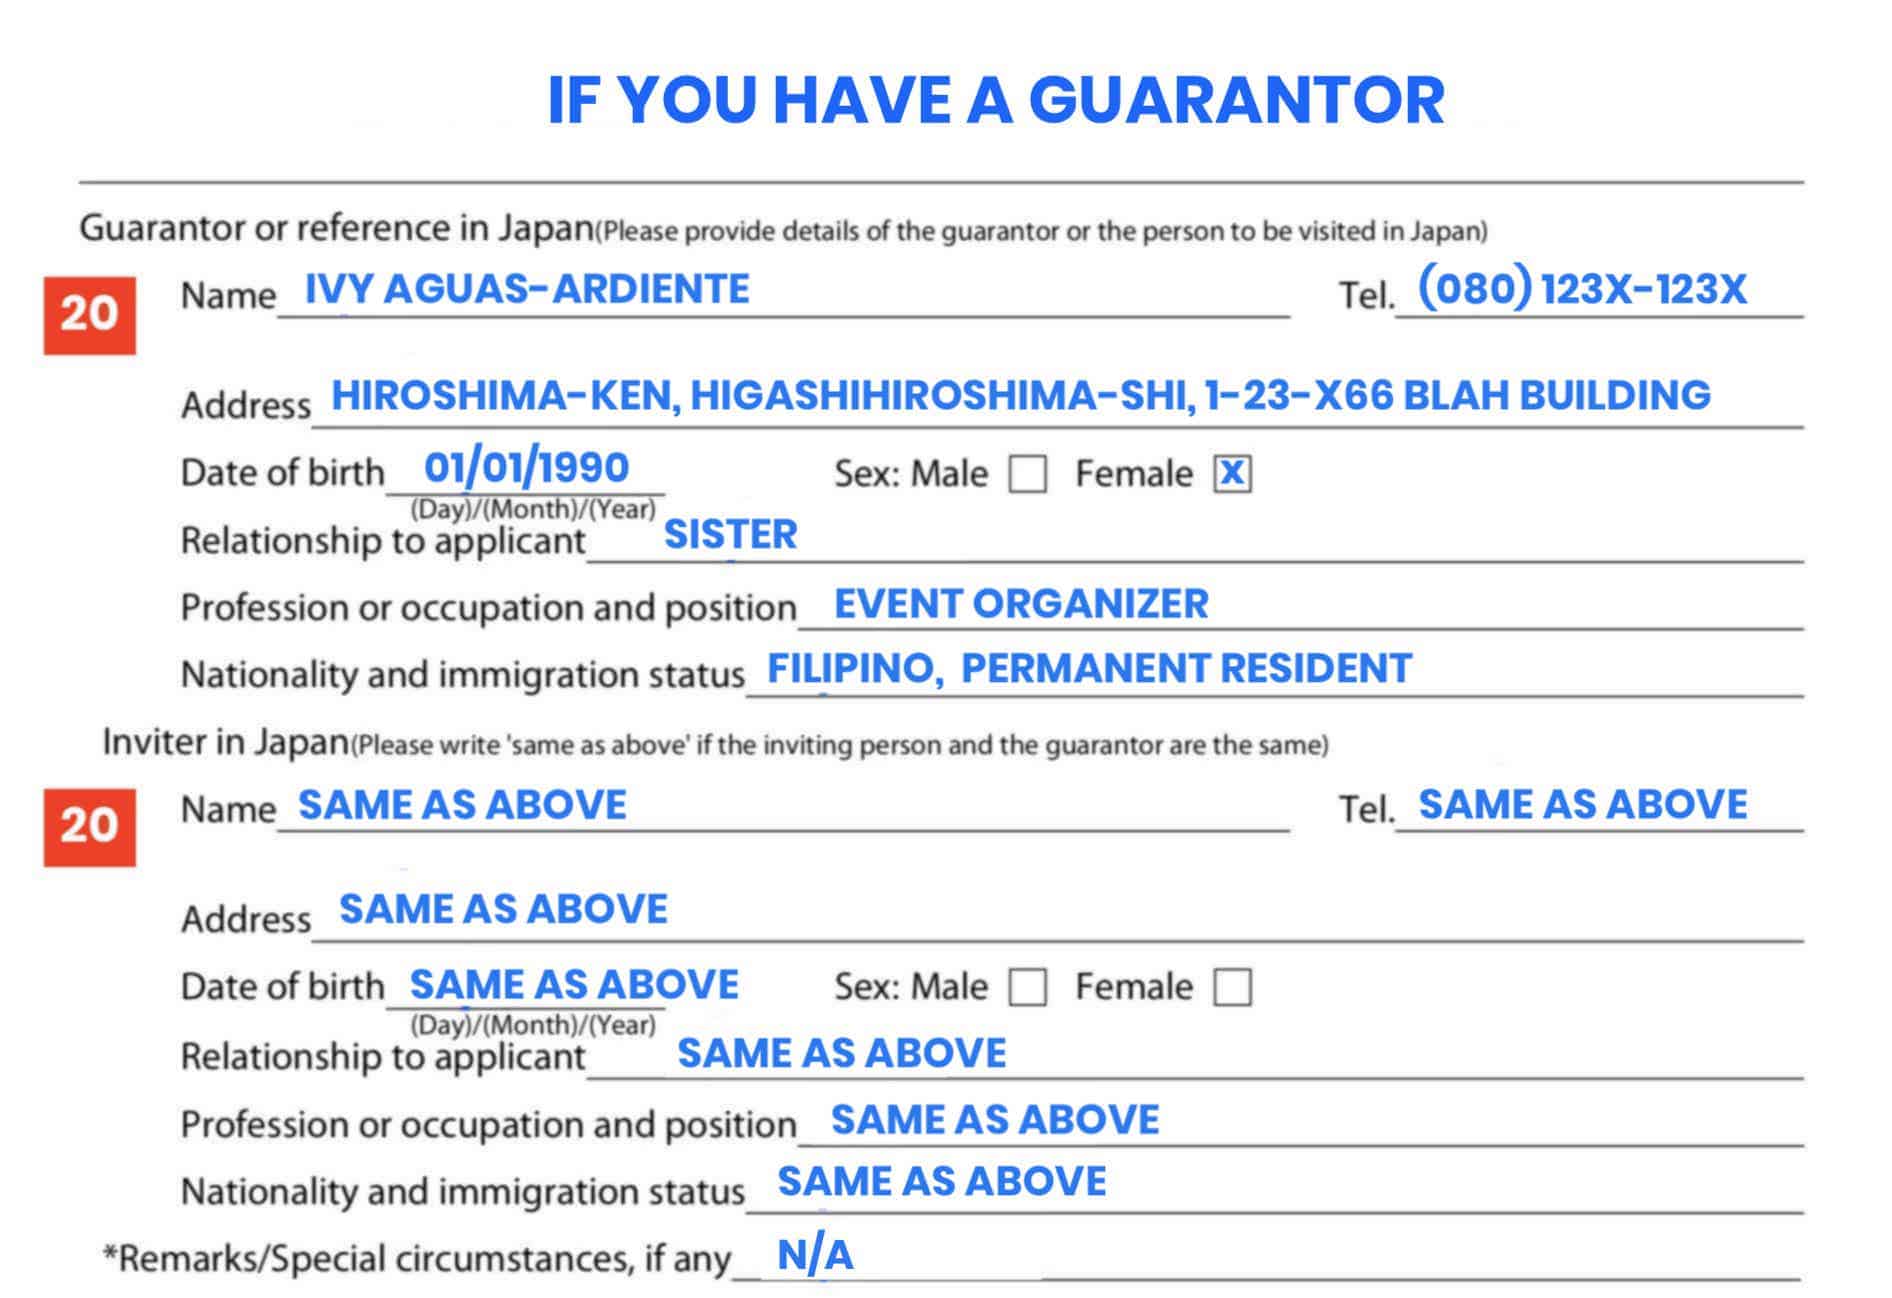 JAPAN VISA APPLICATION FORM: Sample + How to Fill it Out | The Poor